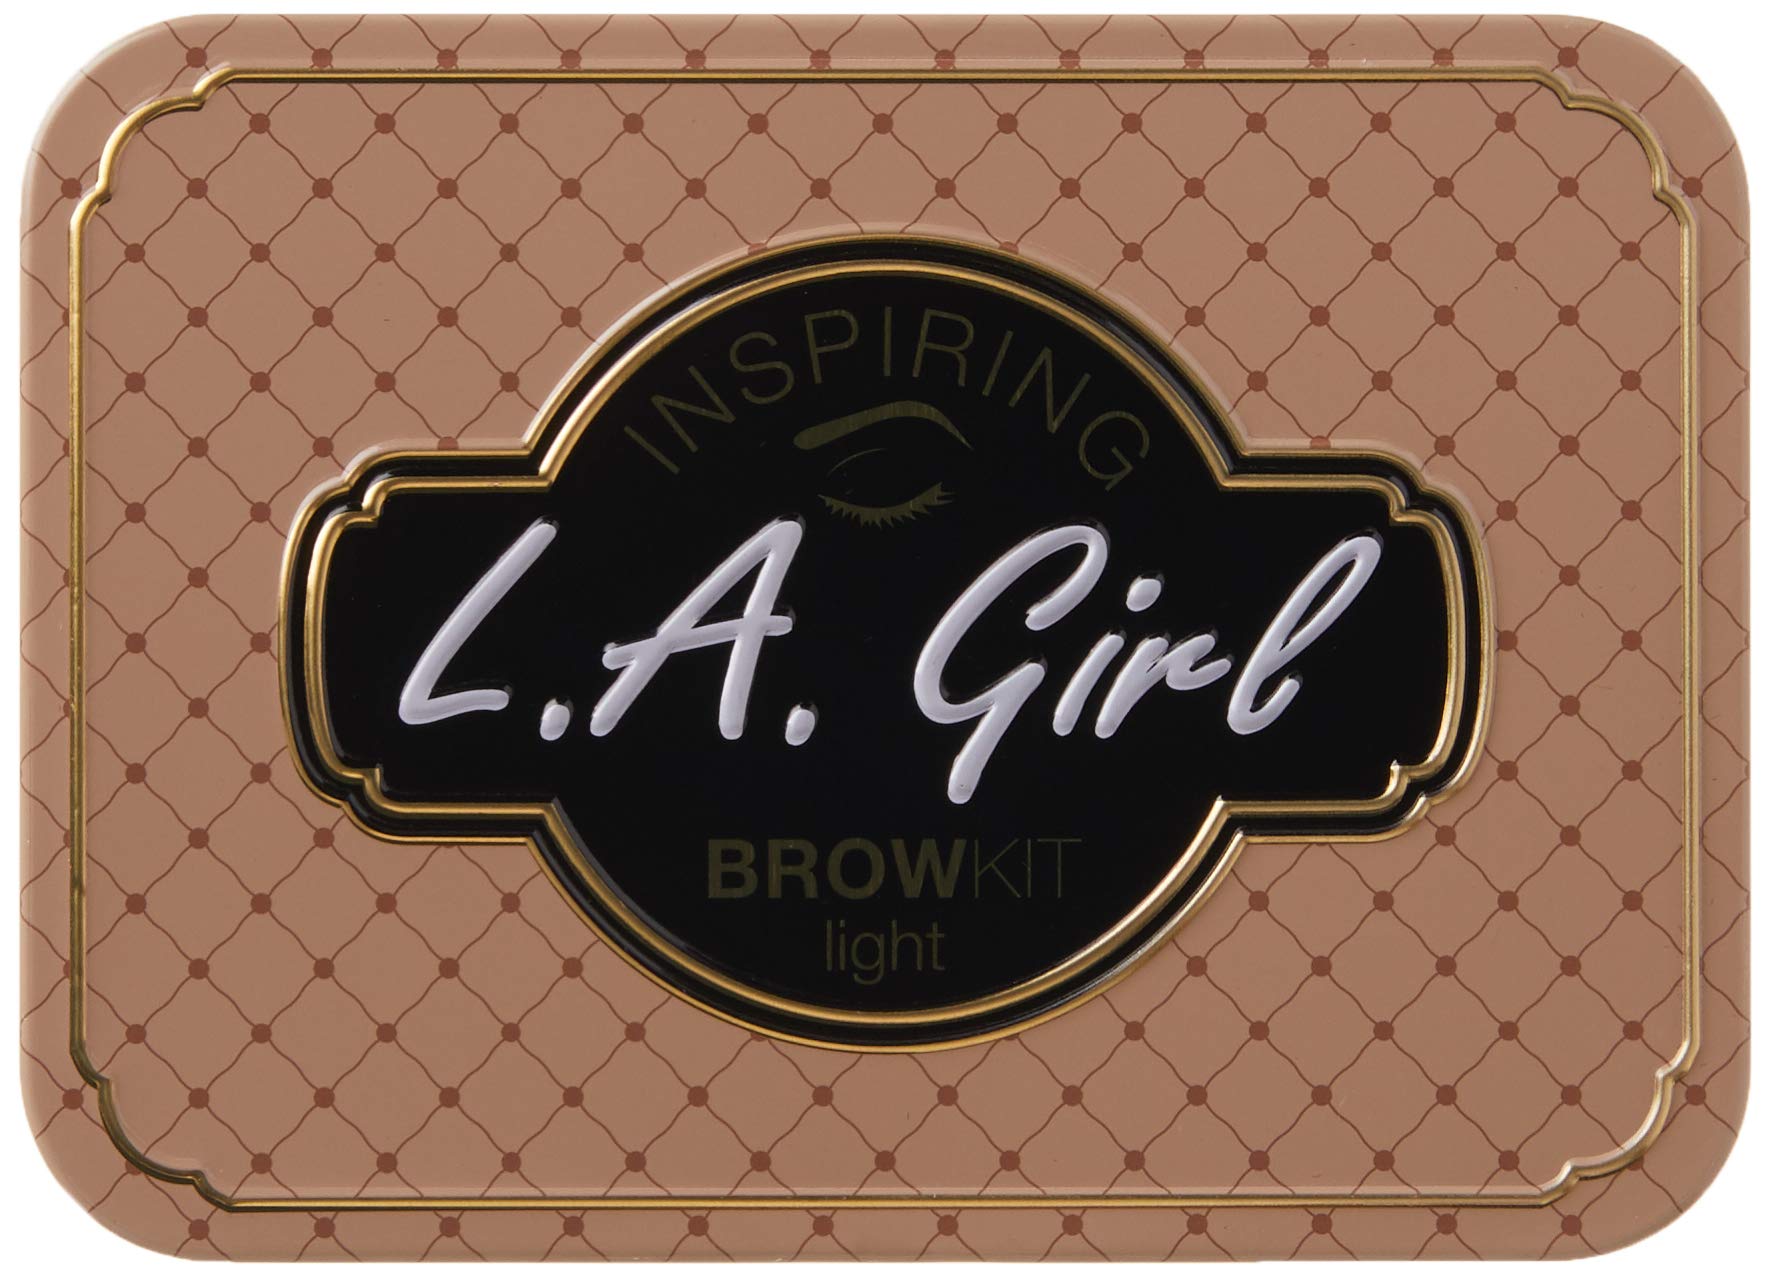 L.A. Girl Inspiring Brow Kit, Light and Bright (Light), Brow Wax 0.035 oz, Brow Powder 0.15 oz, Includes Tweezers and Dual Ended Brush with Spoolie,GES341